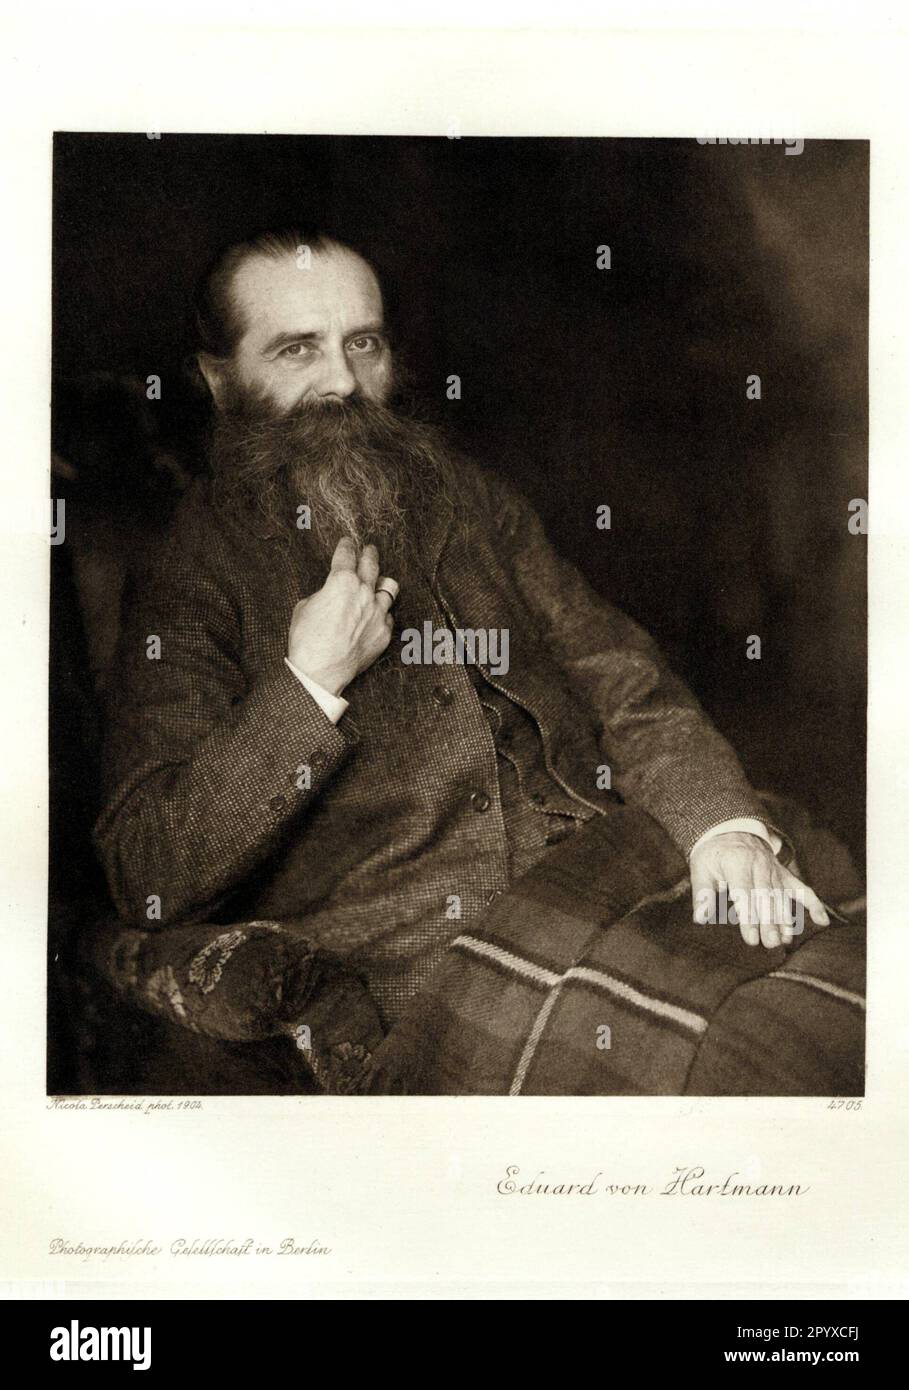 Eduard von Hartmann (1842-1906), German philosopher and founder of the newer vitalism. Photography by Nicola Perscheid. Photo: Heliogravure, Corpus Imaginum, Hanfstaengl Collection. [automated translation] Stock Photo